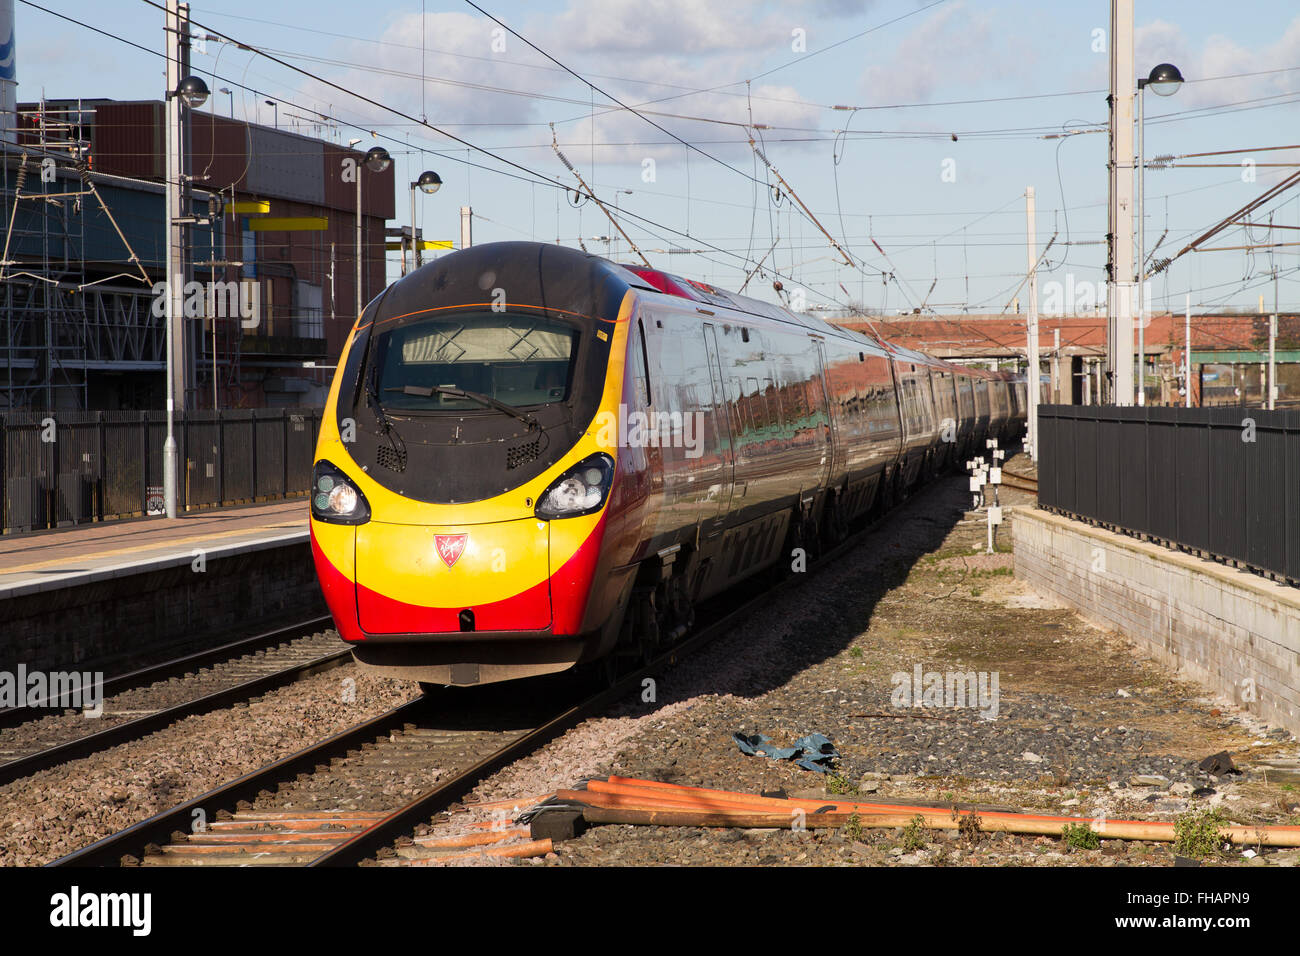 Virgin Trains Pendolino Arrives at Warrington Bank Quay with a Glasgow Euston service in bright sunlight Stock Photo